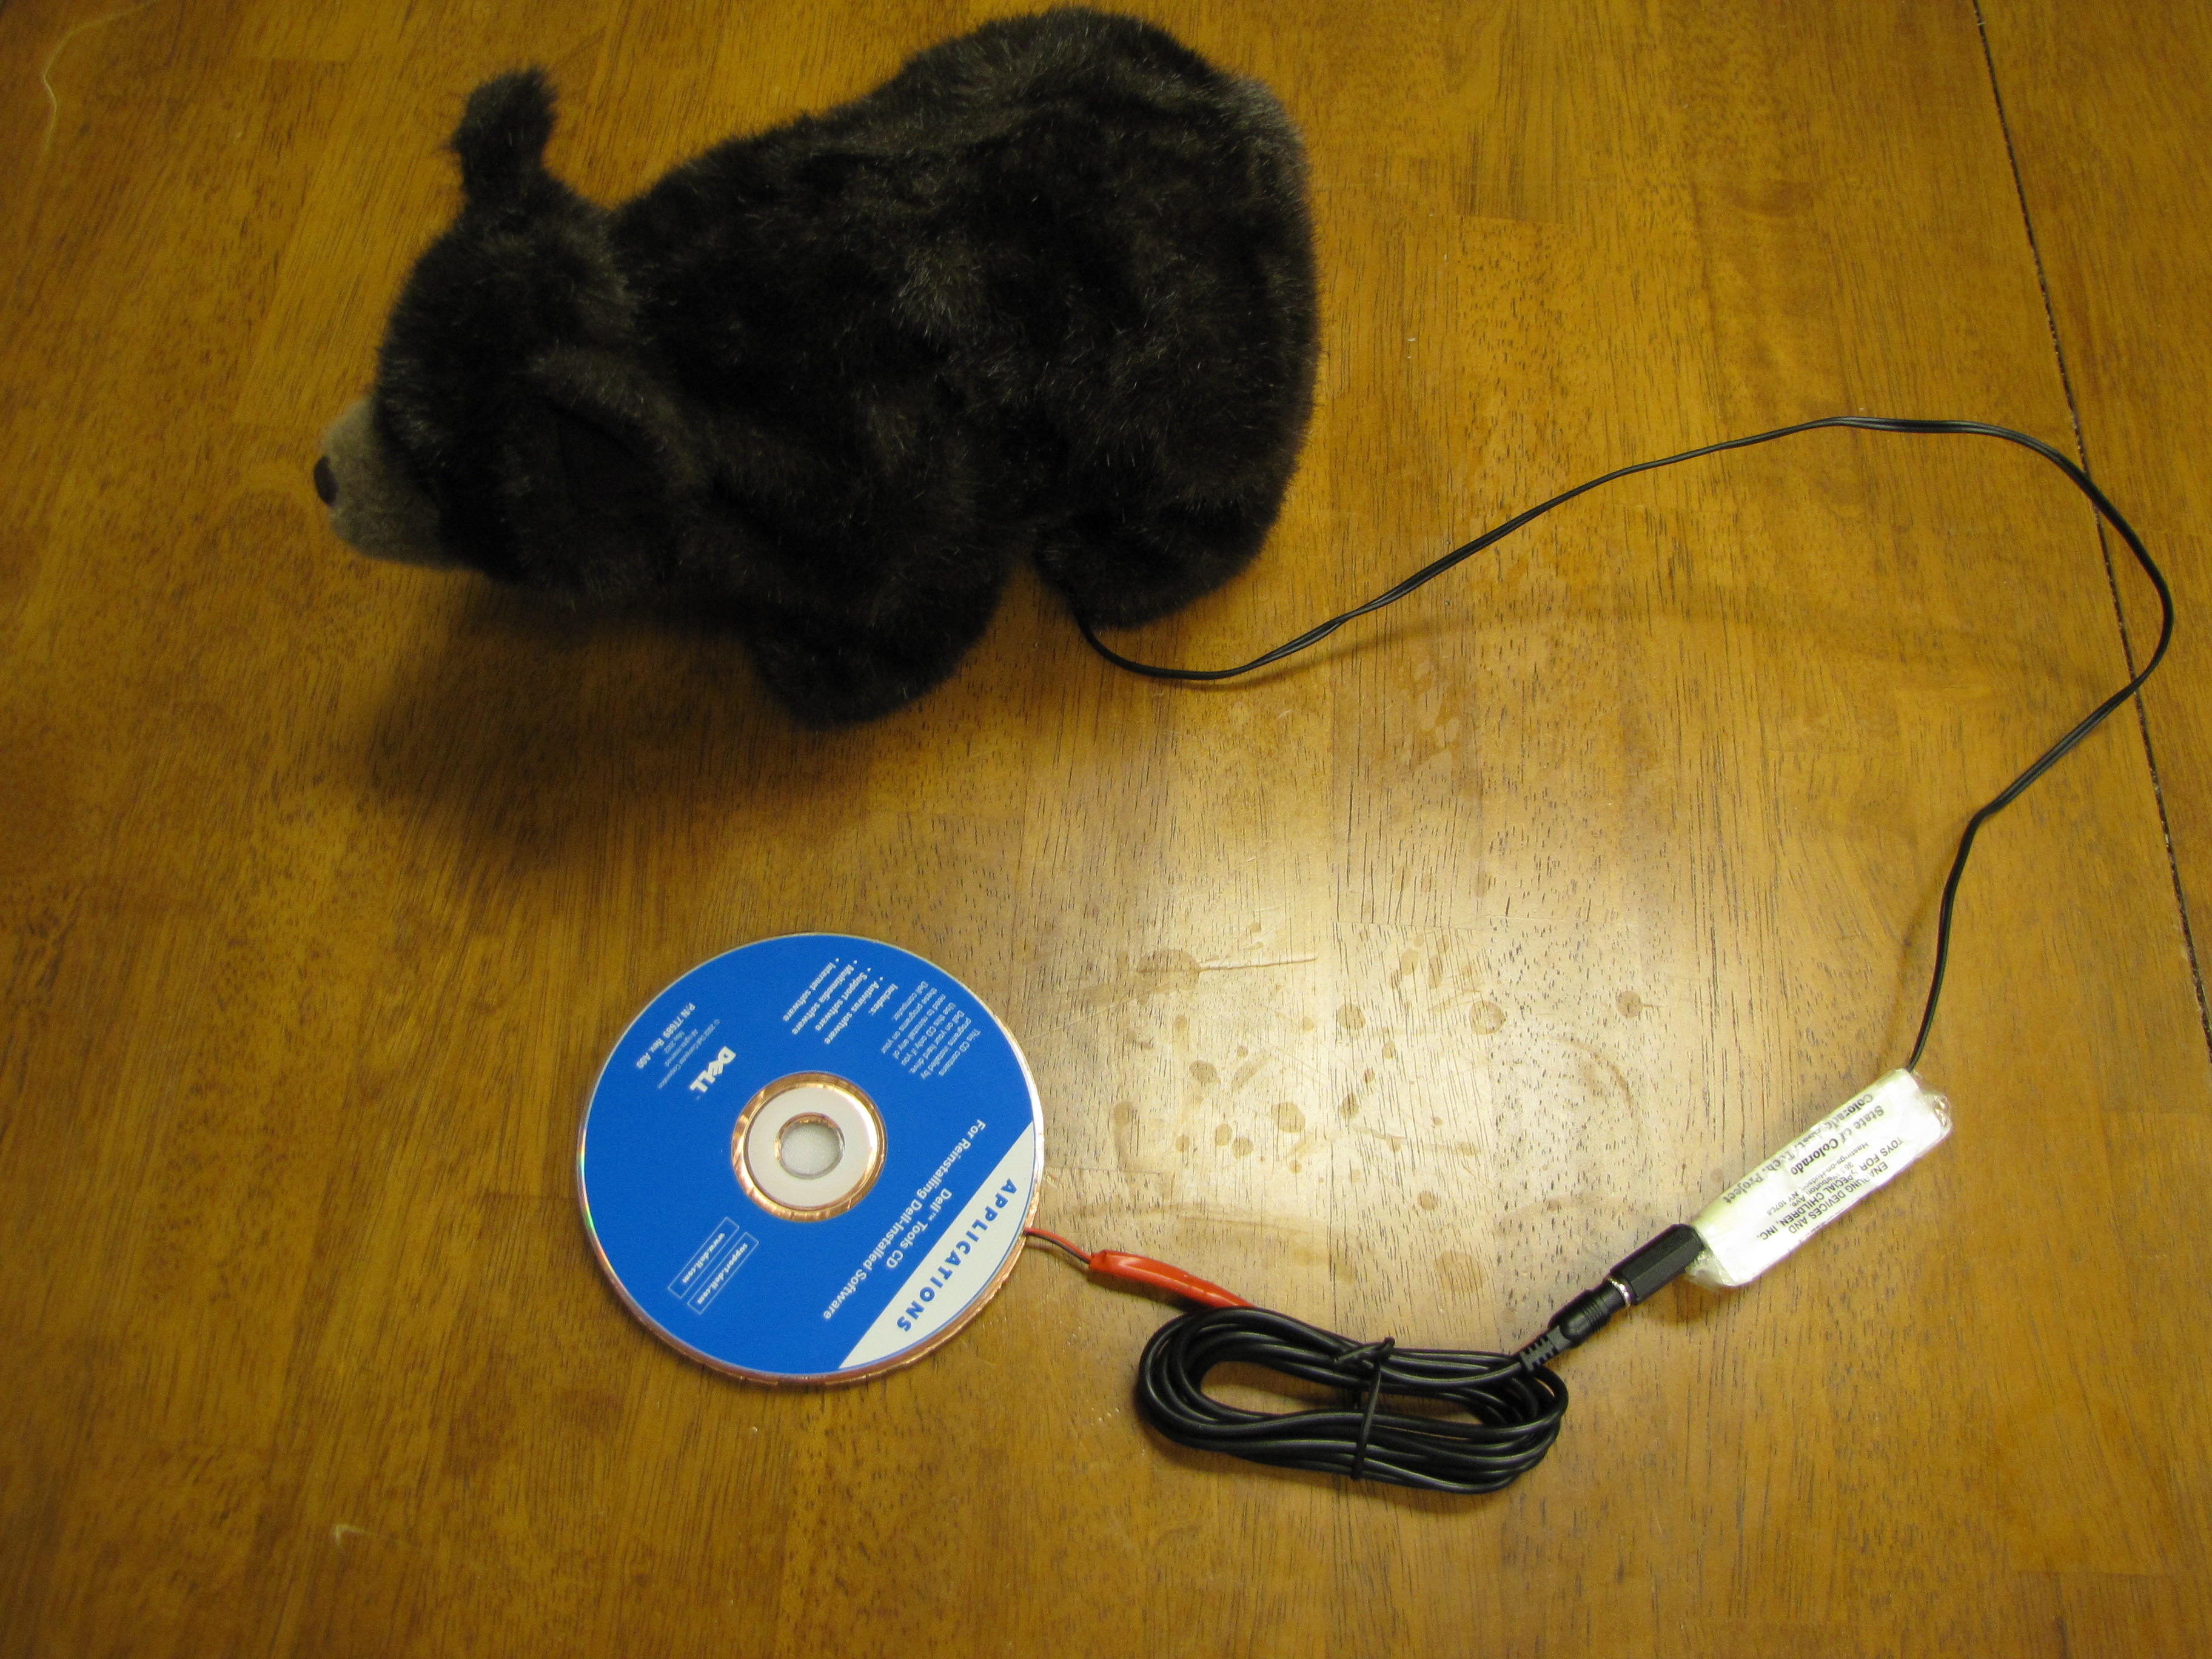 CD switch connected to a toy